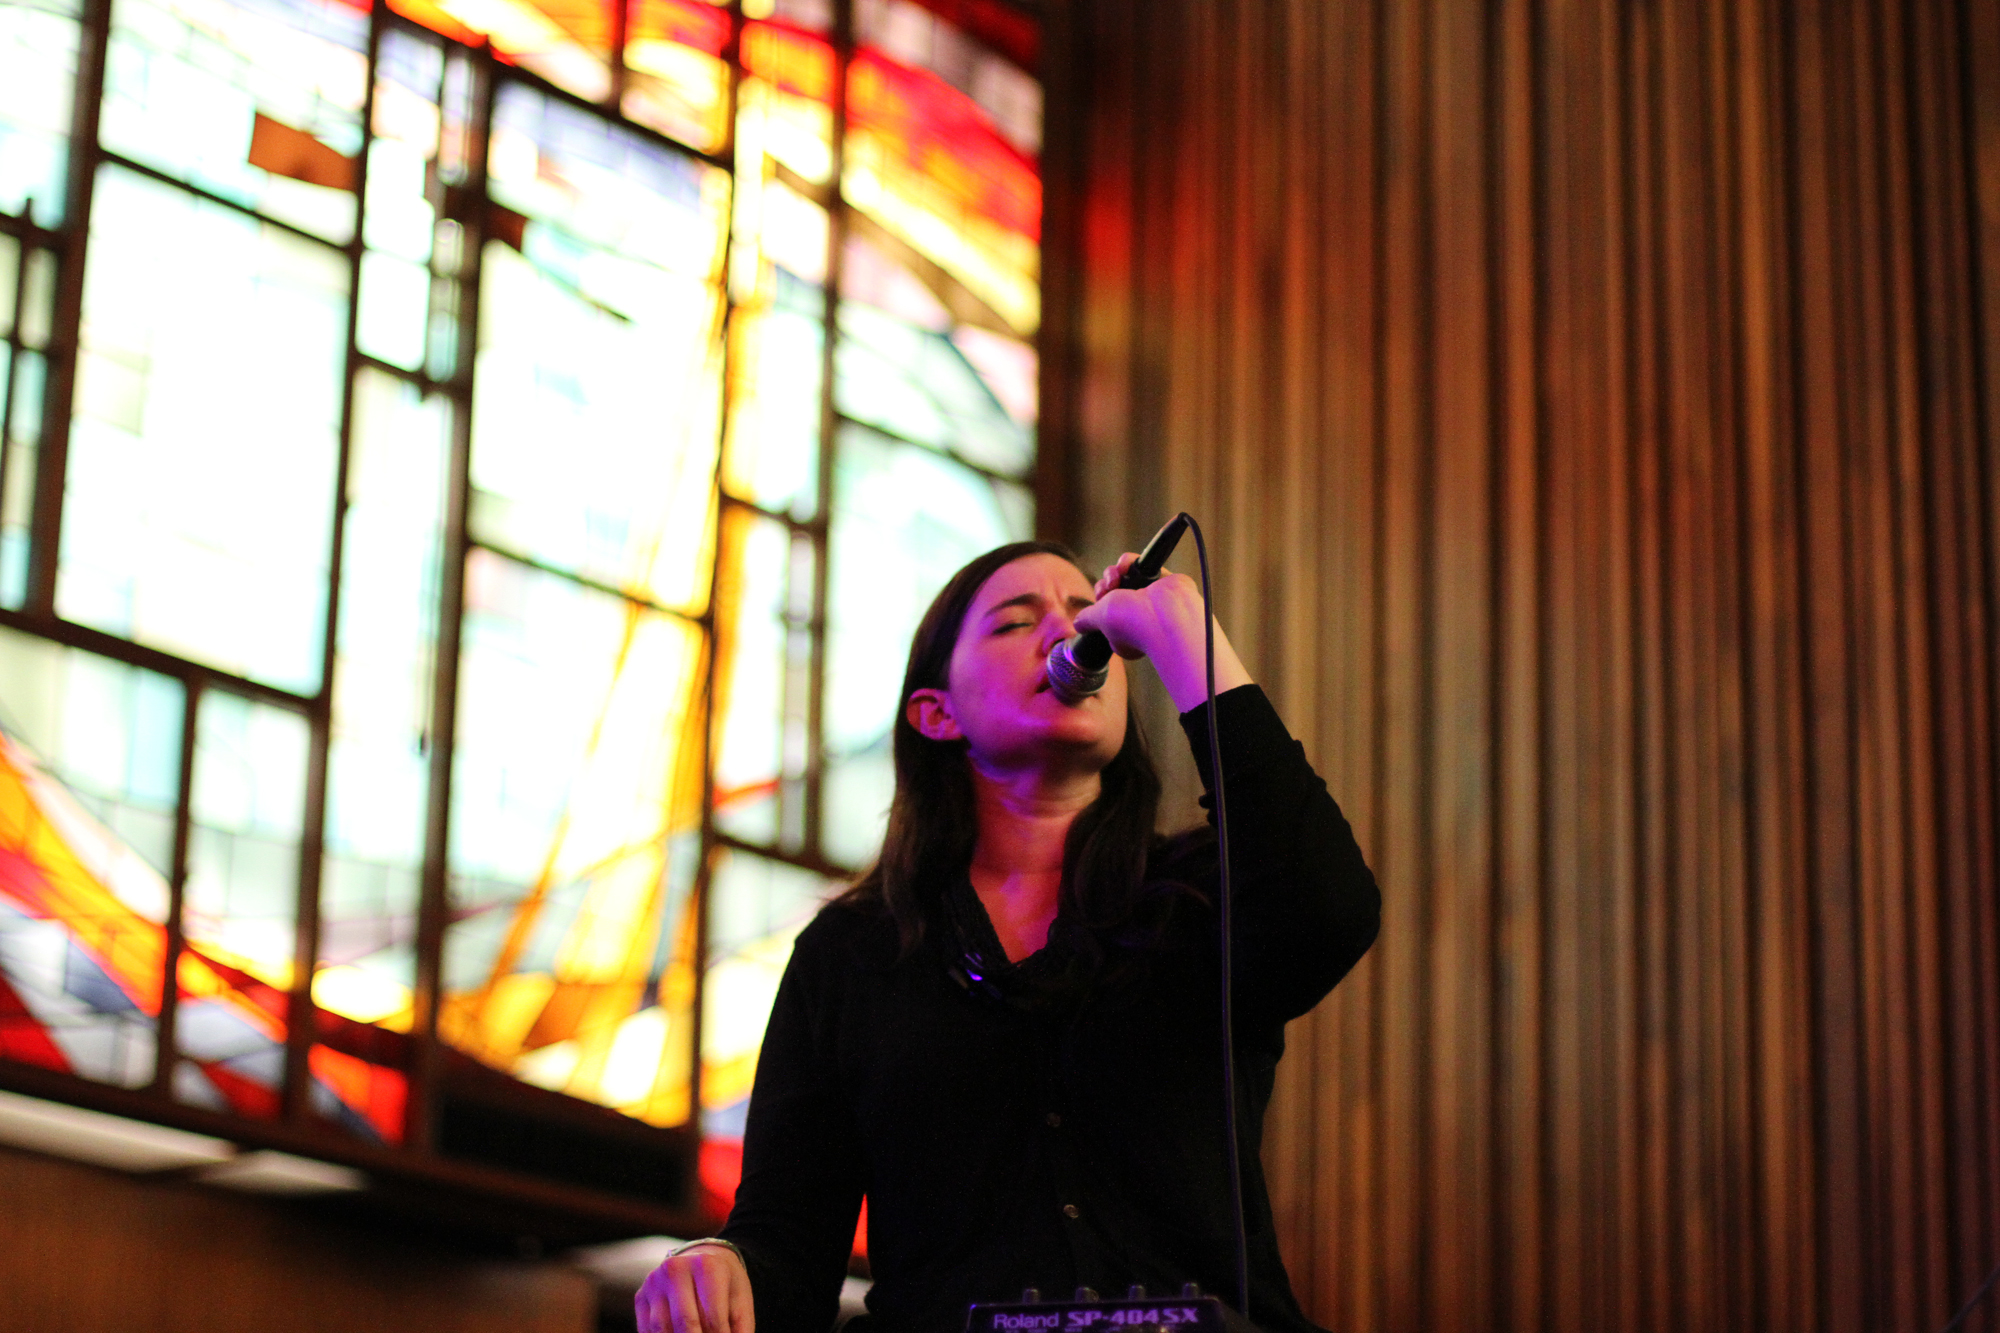 Julianna Barwick performs at the Pitchfork showcase at the Central Presbyterian Church during South By Southwest in Austin, Texas on March 17, 2011.